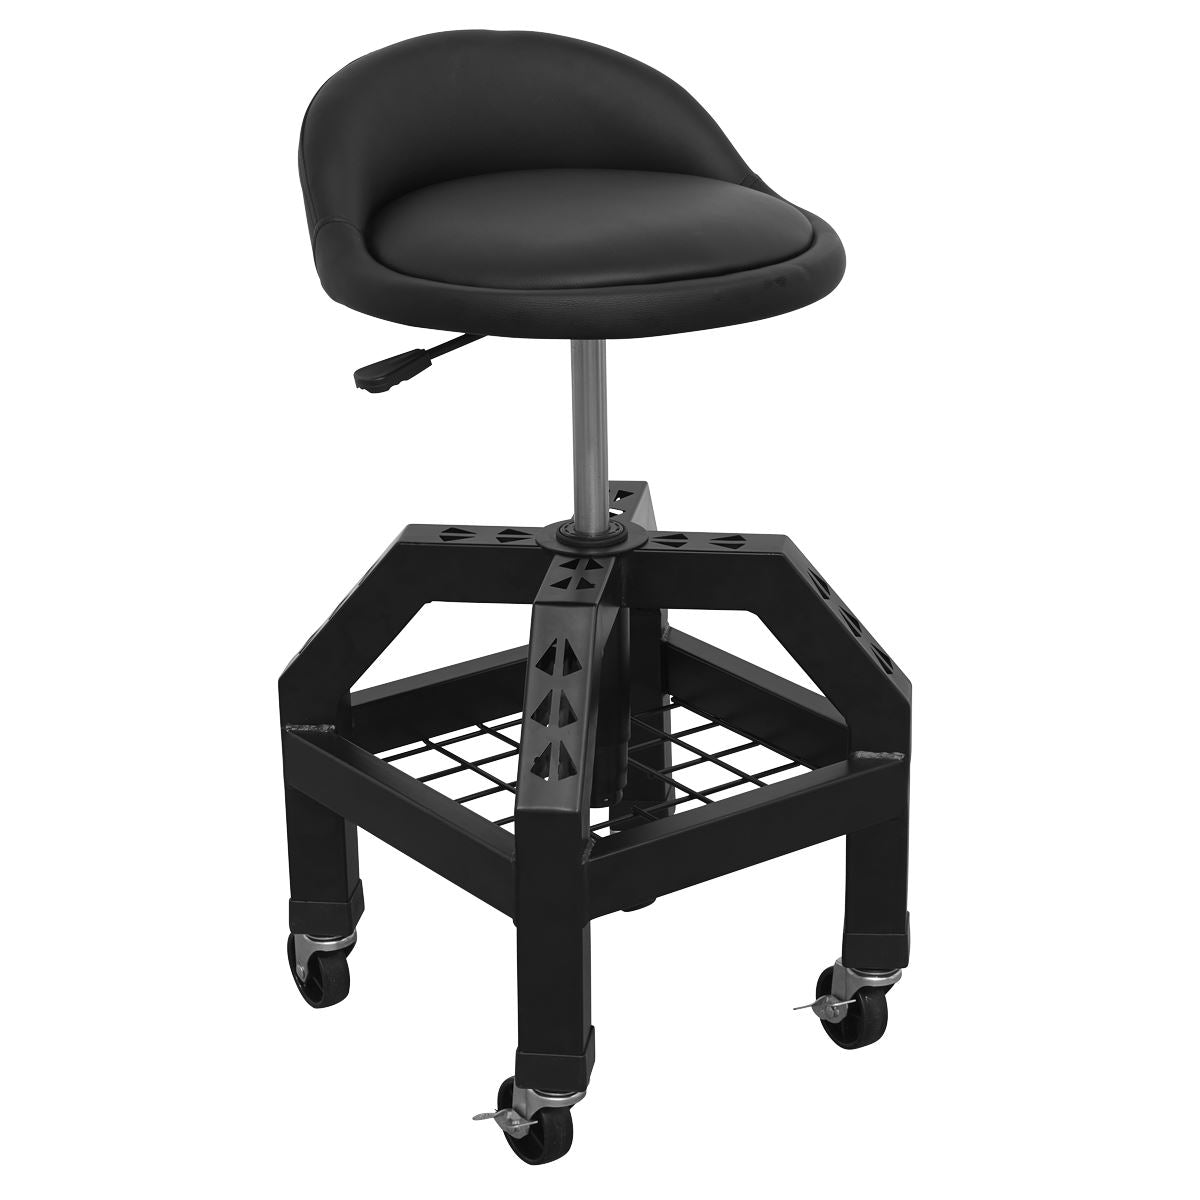 Sealey Premier Industrial Creeper Stool Pneumatic with Adjustable Height Swivel Seat & Back Rest